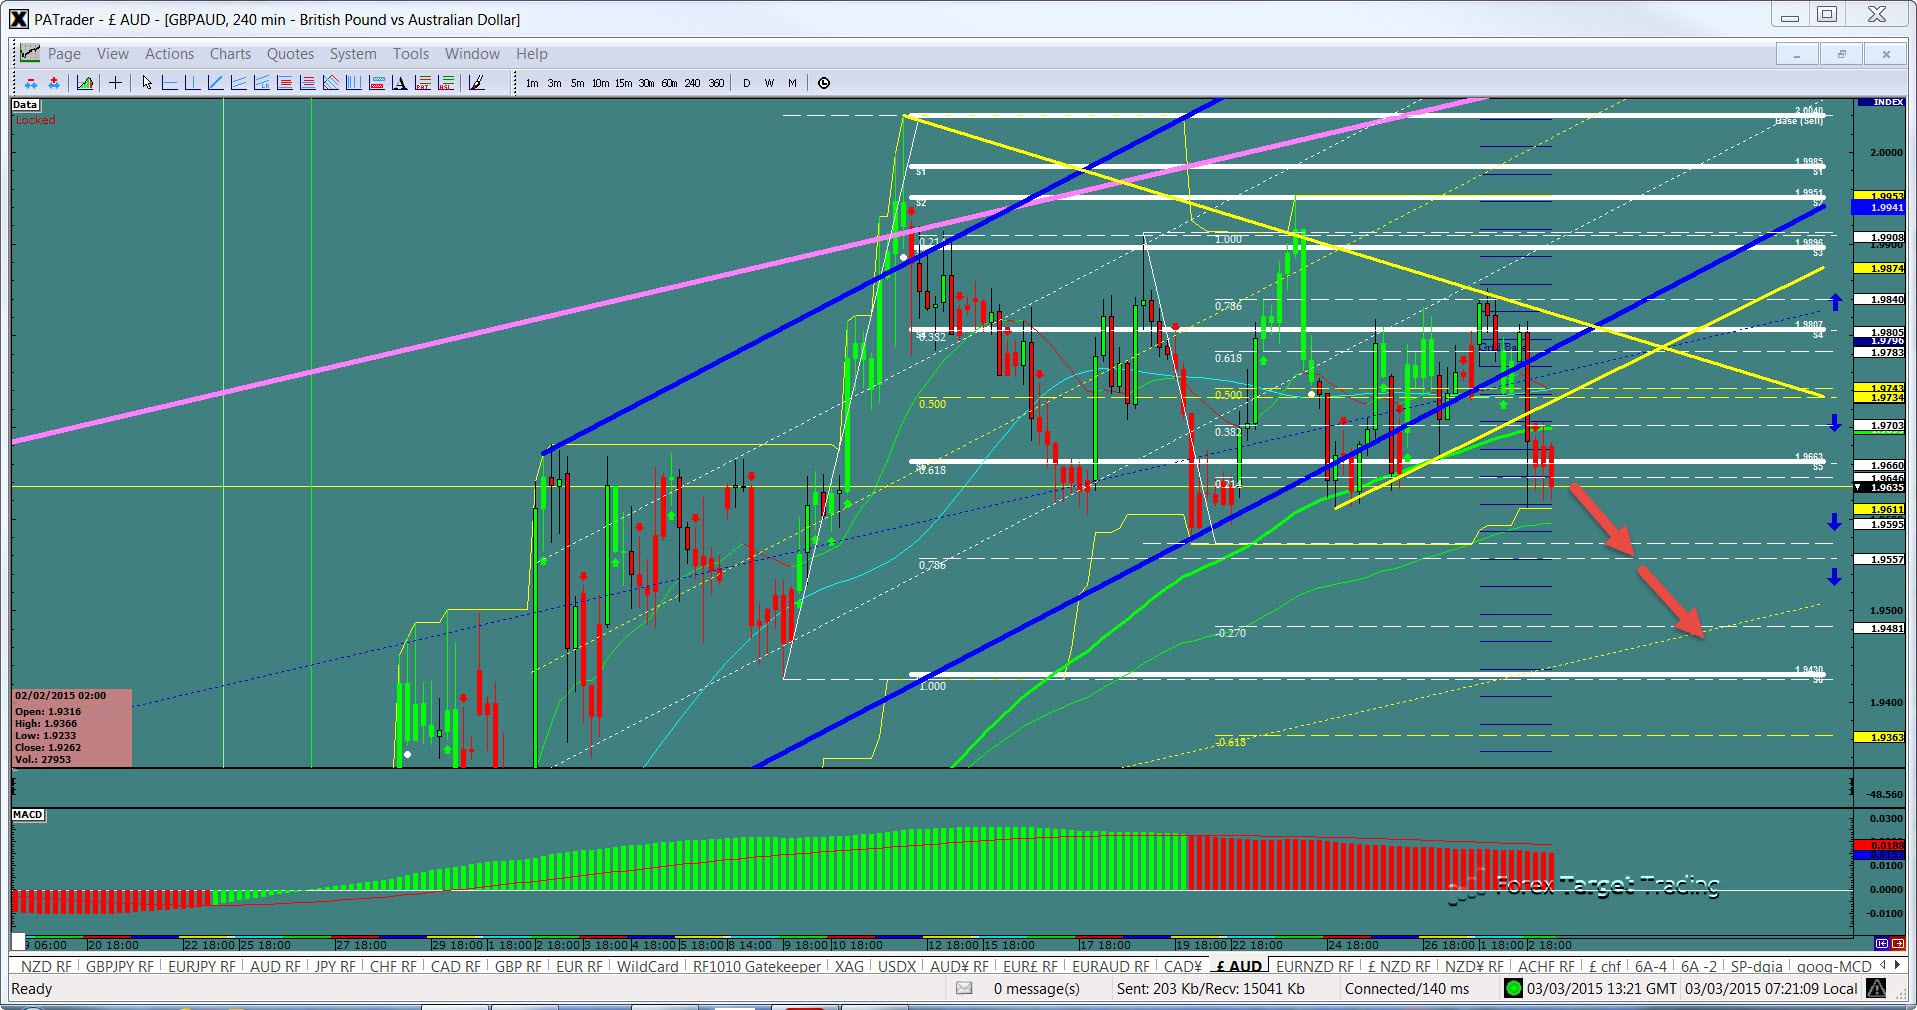 GBP/AUD 240 Minute Chart